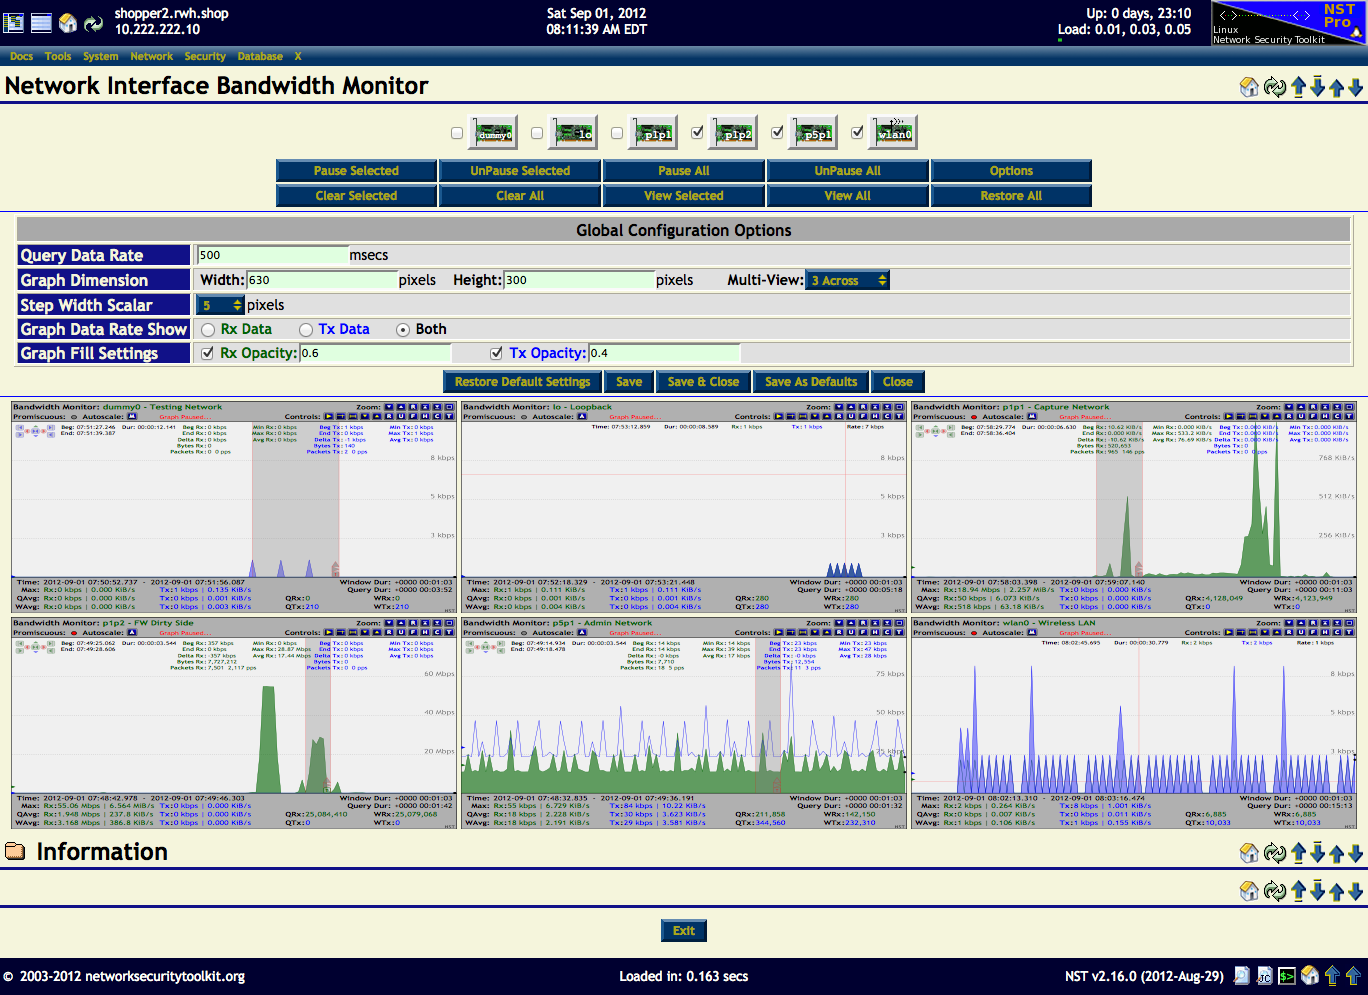 NST Network Interface Bandwidth Monitor Multi-View - 6 Network Interfaces Shown 3 Across